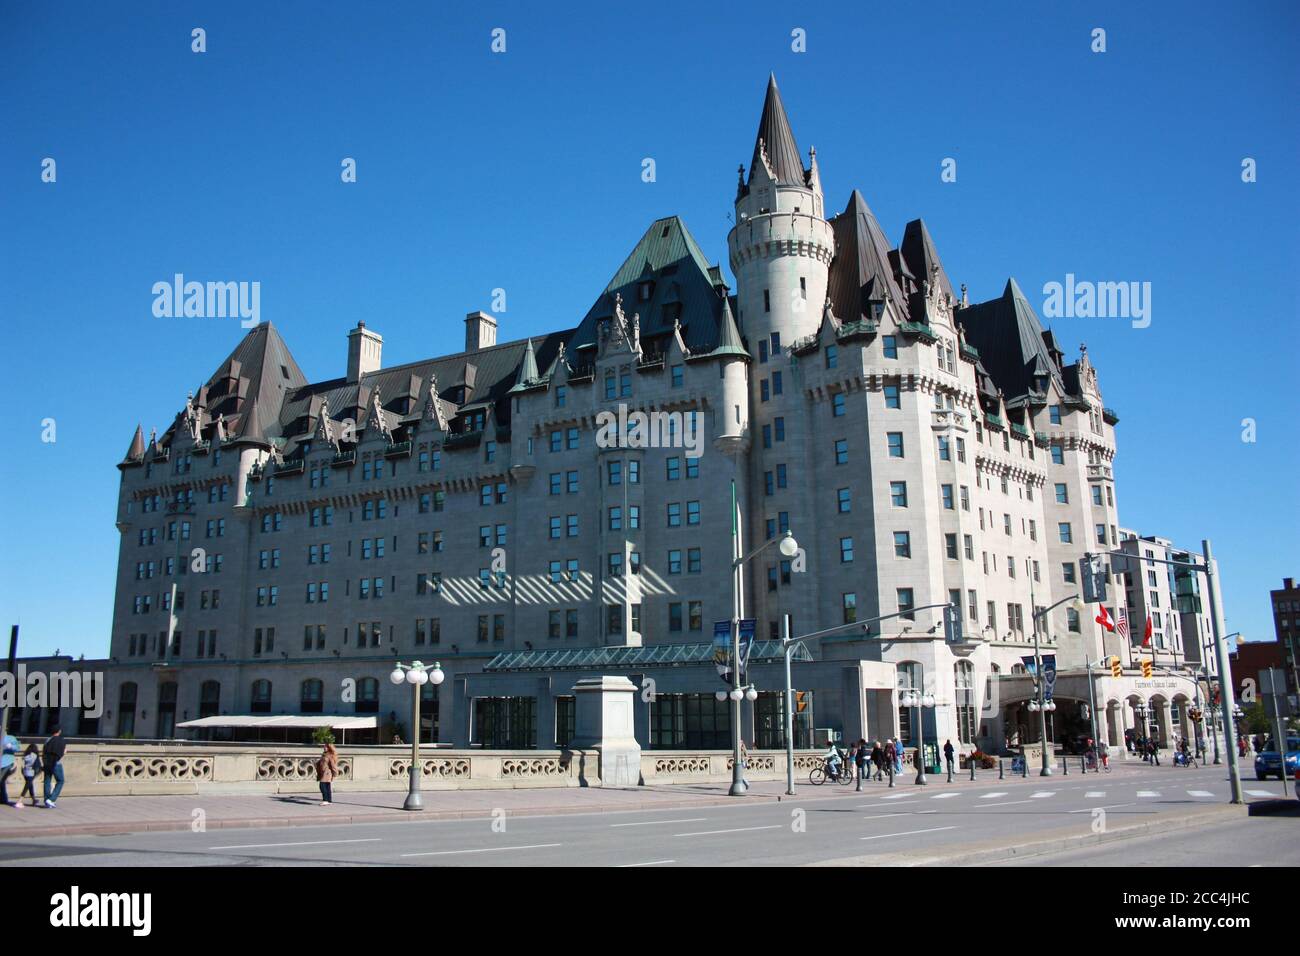 Hotel The Fairmont Chateau Laurier in Ottawa, Canada Stock Photo - Alamy